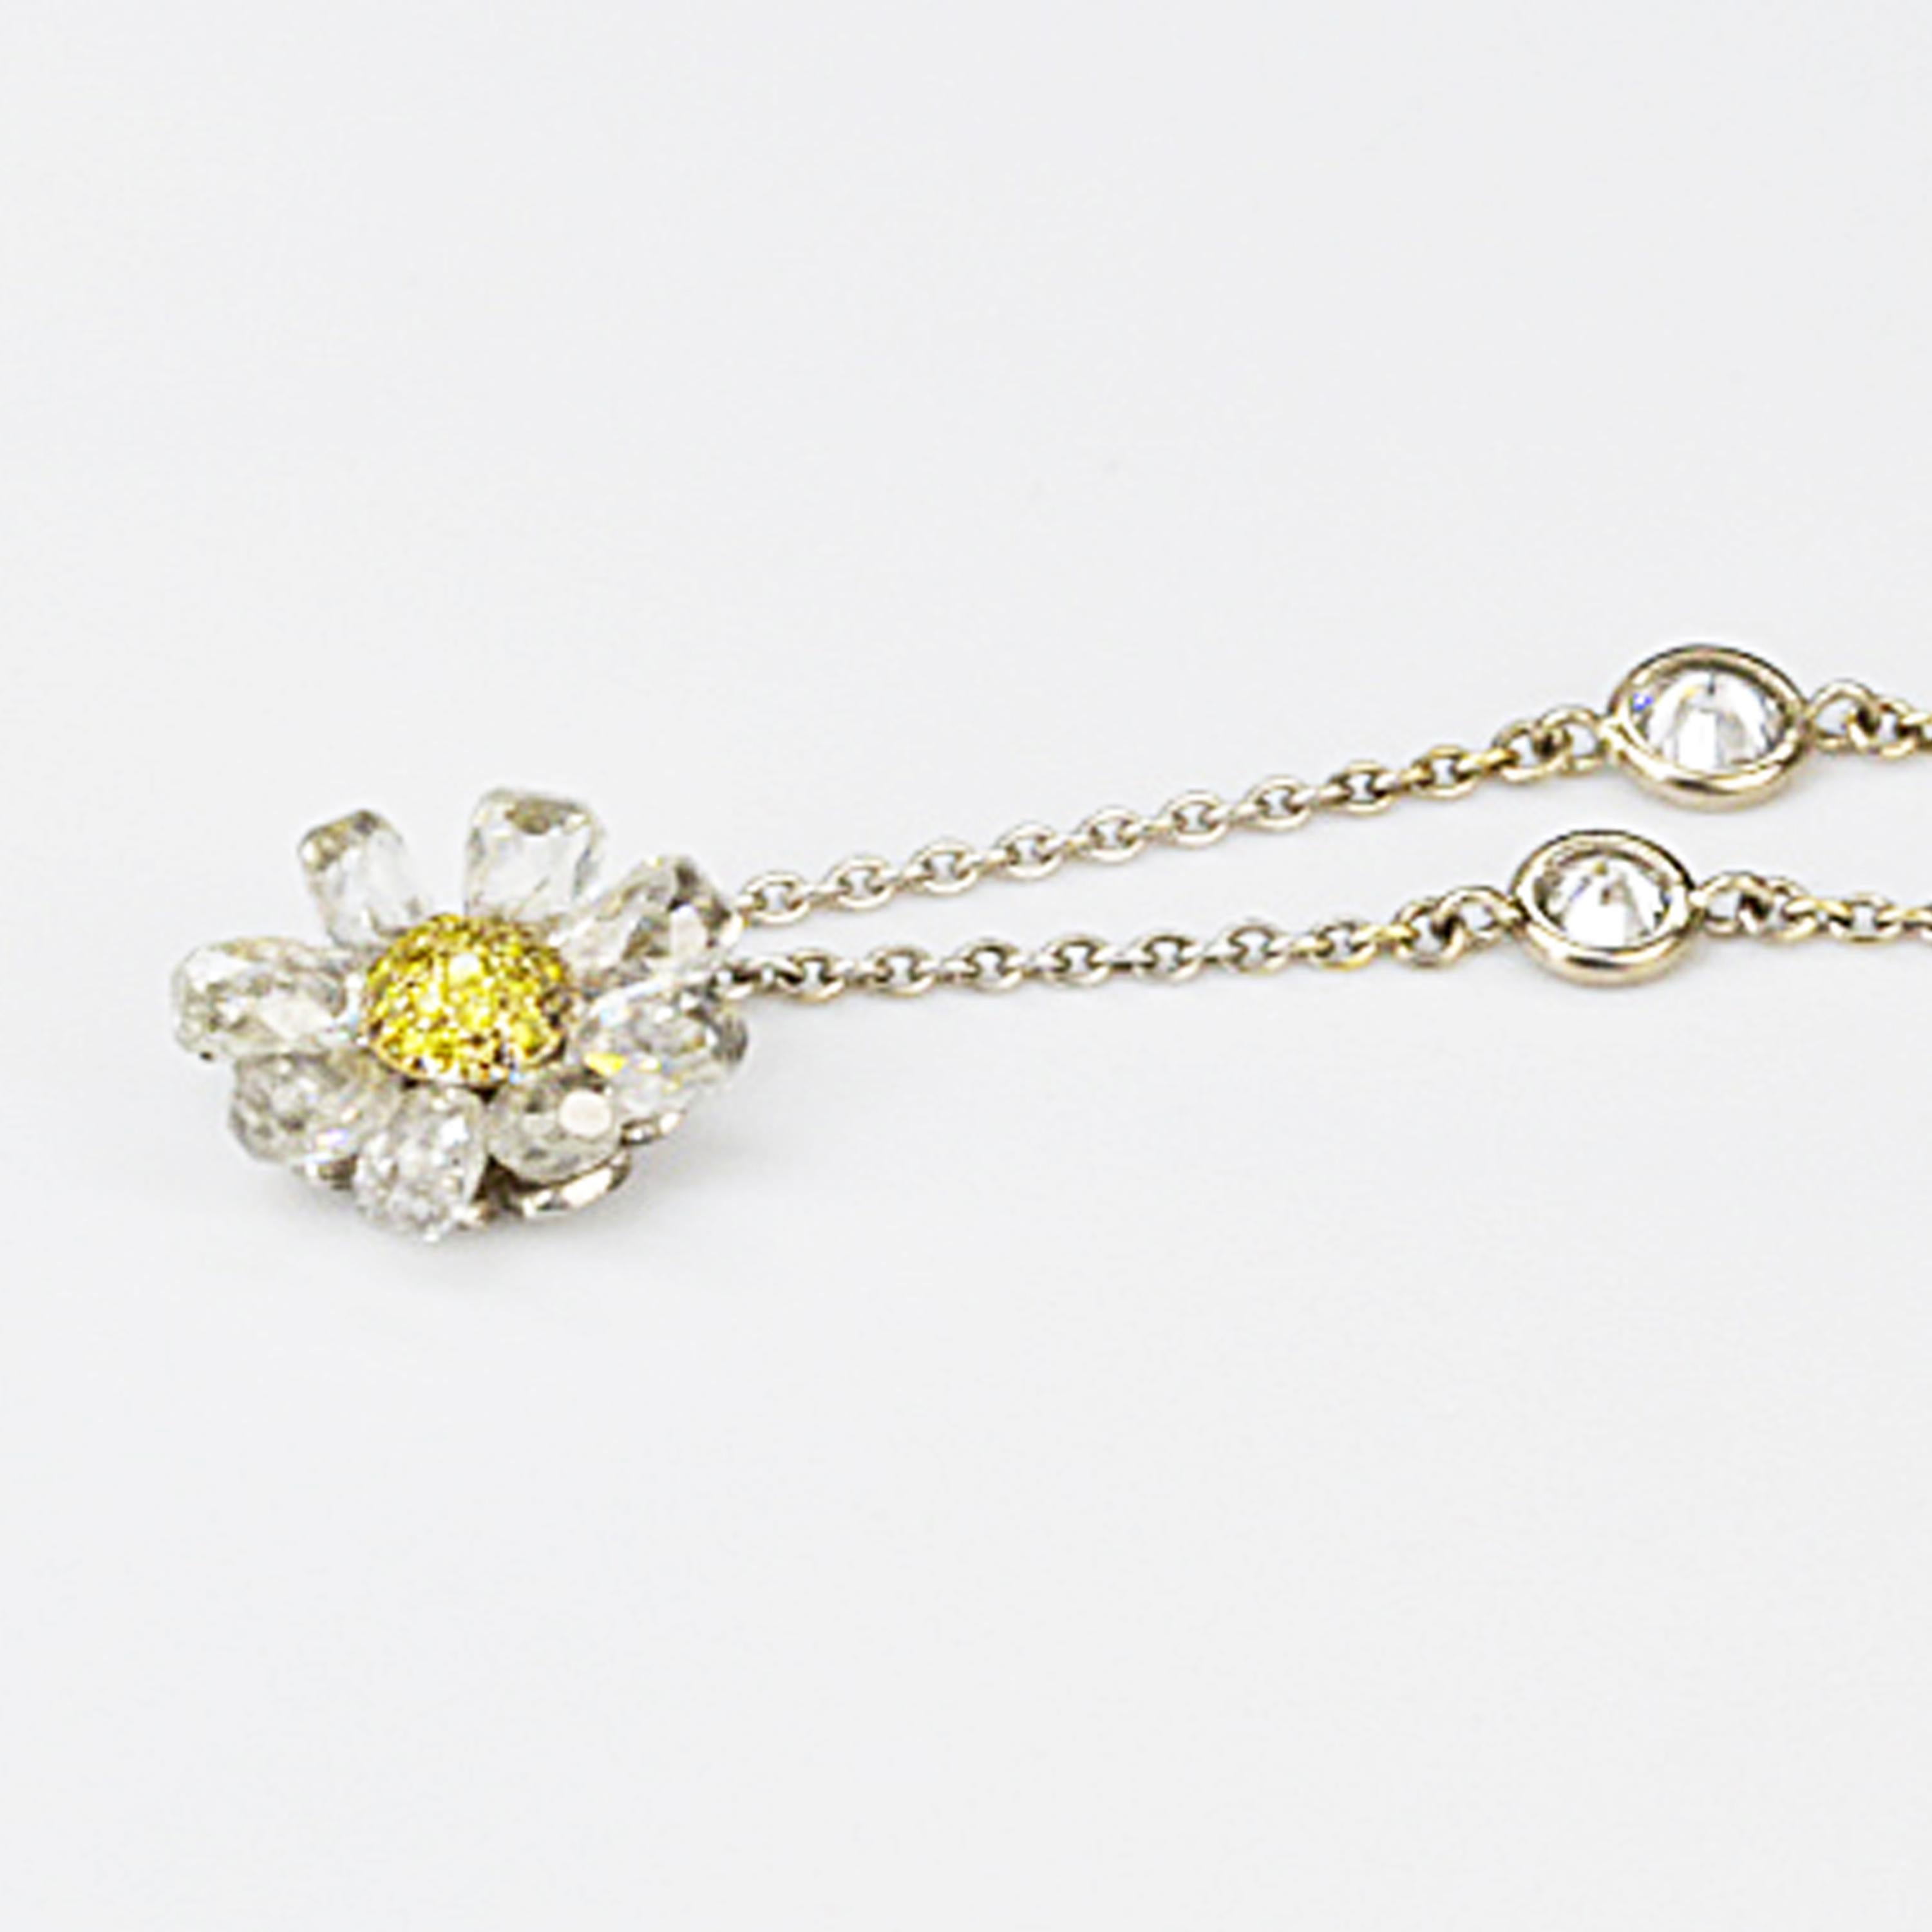 Matthew Cambery Platinum and 18K Yellow Gold Daisy pendant comprising 8 briolette white diamonds with a central pave yellow diamond central section. The chain has spectacle set diamonds.